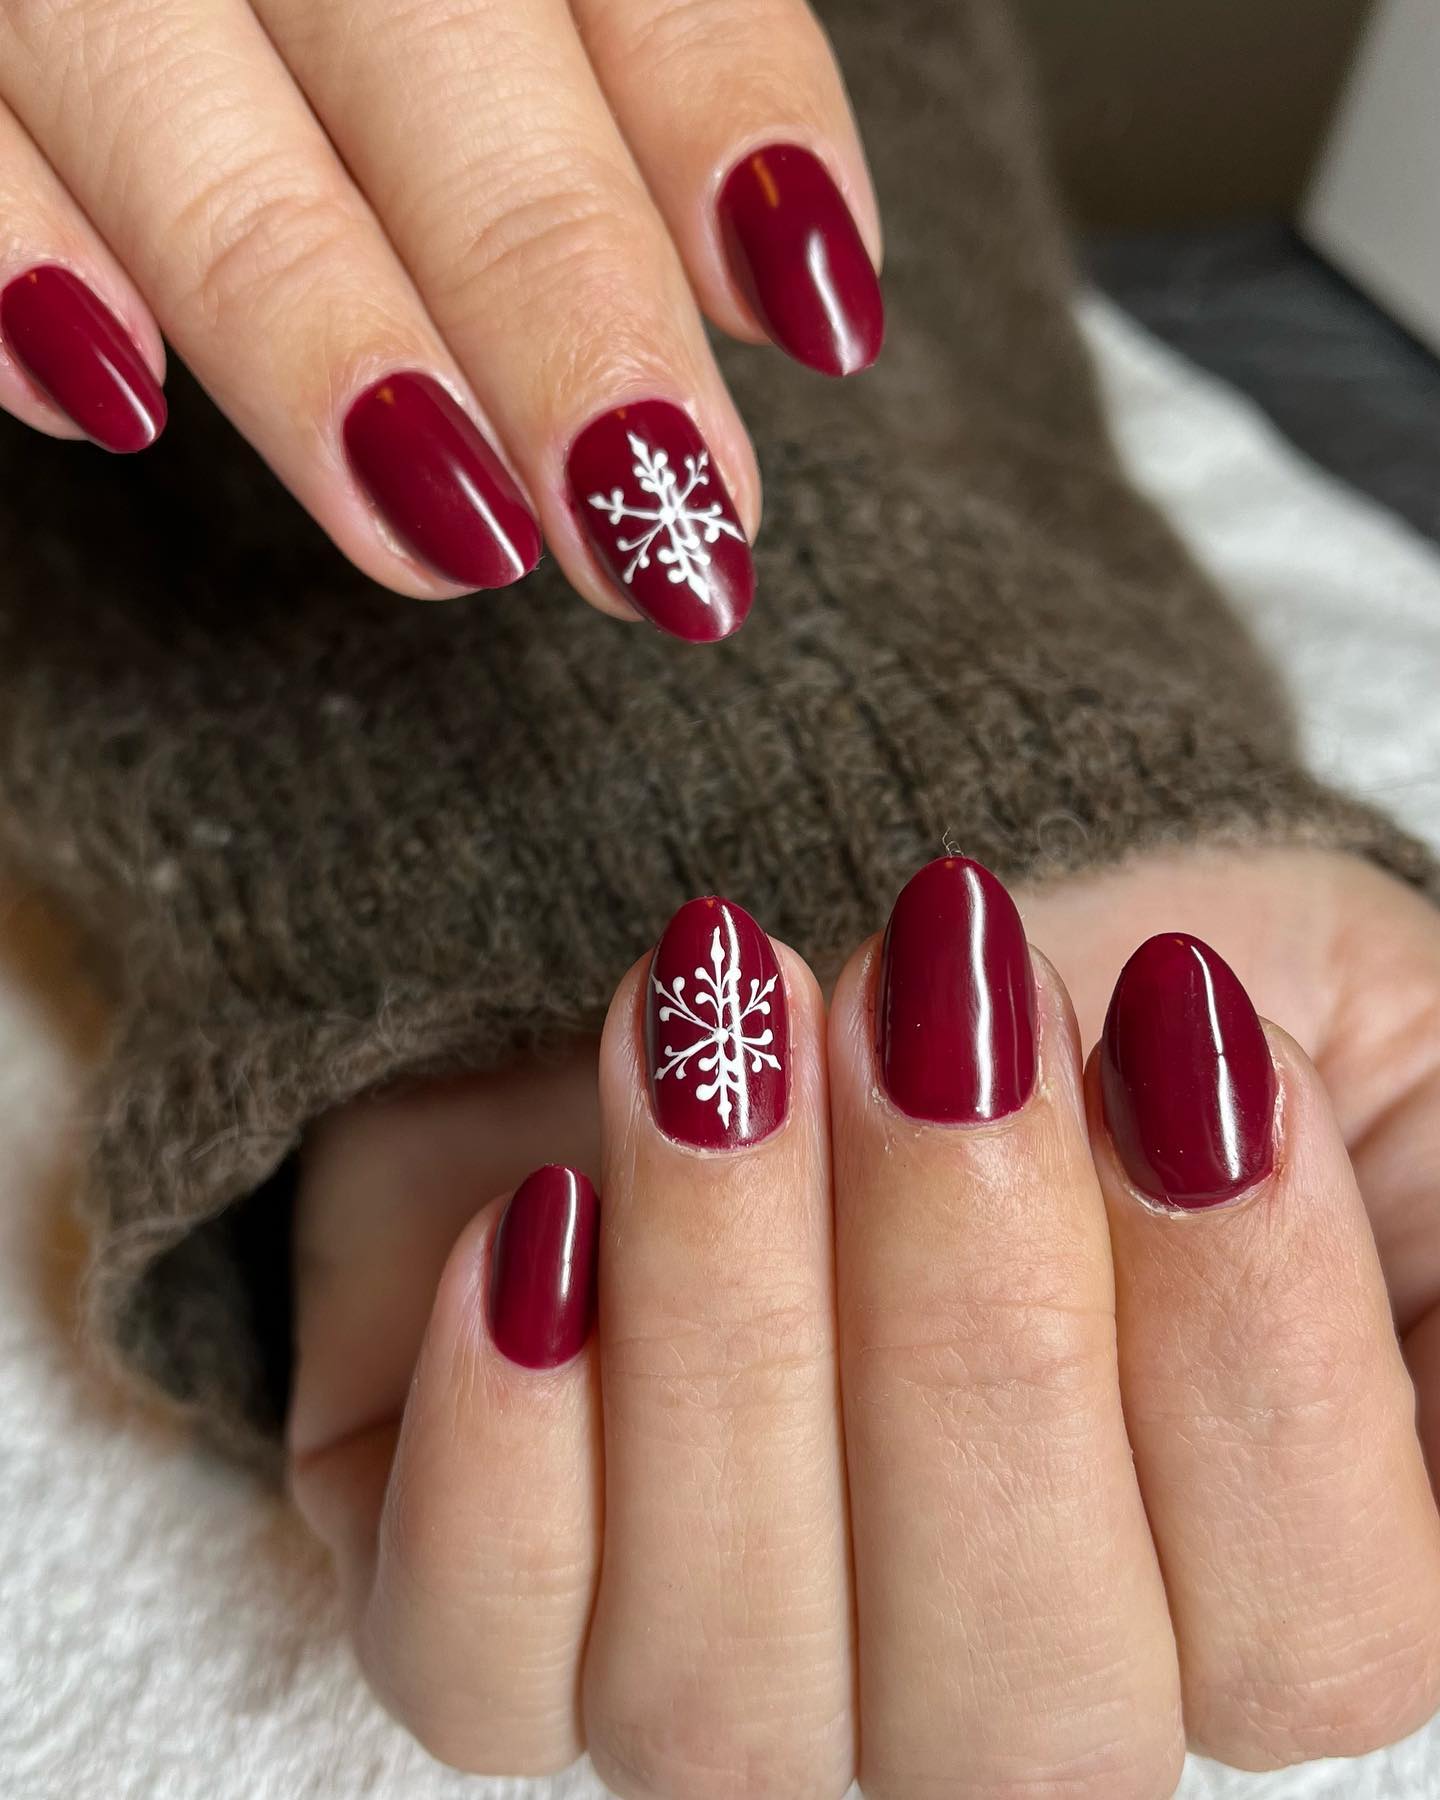 100 Cute Christmas Nail Art Designs For A Fun And Festive Manicure